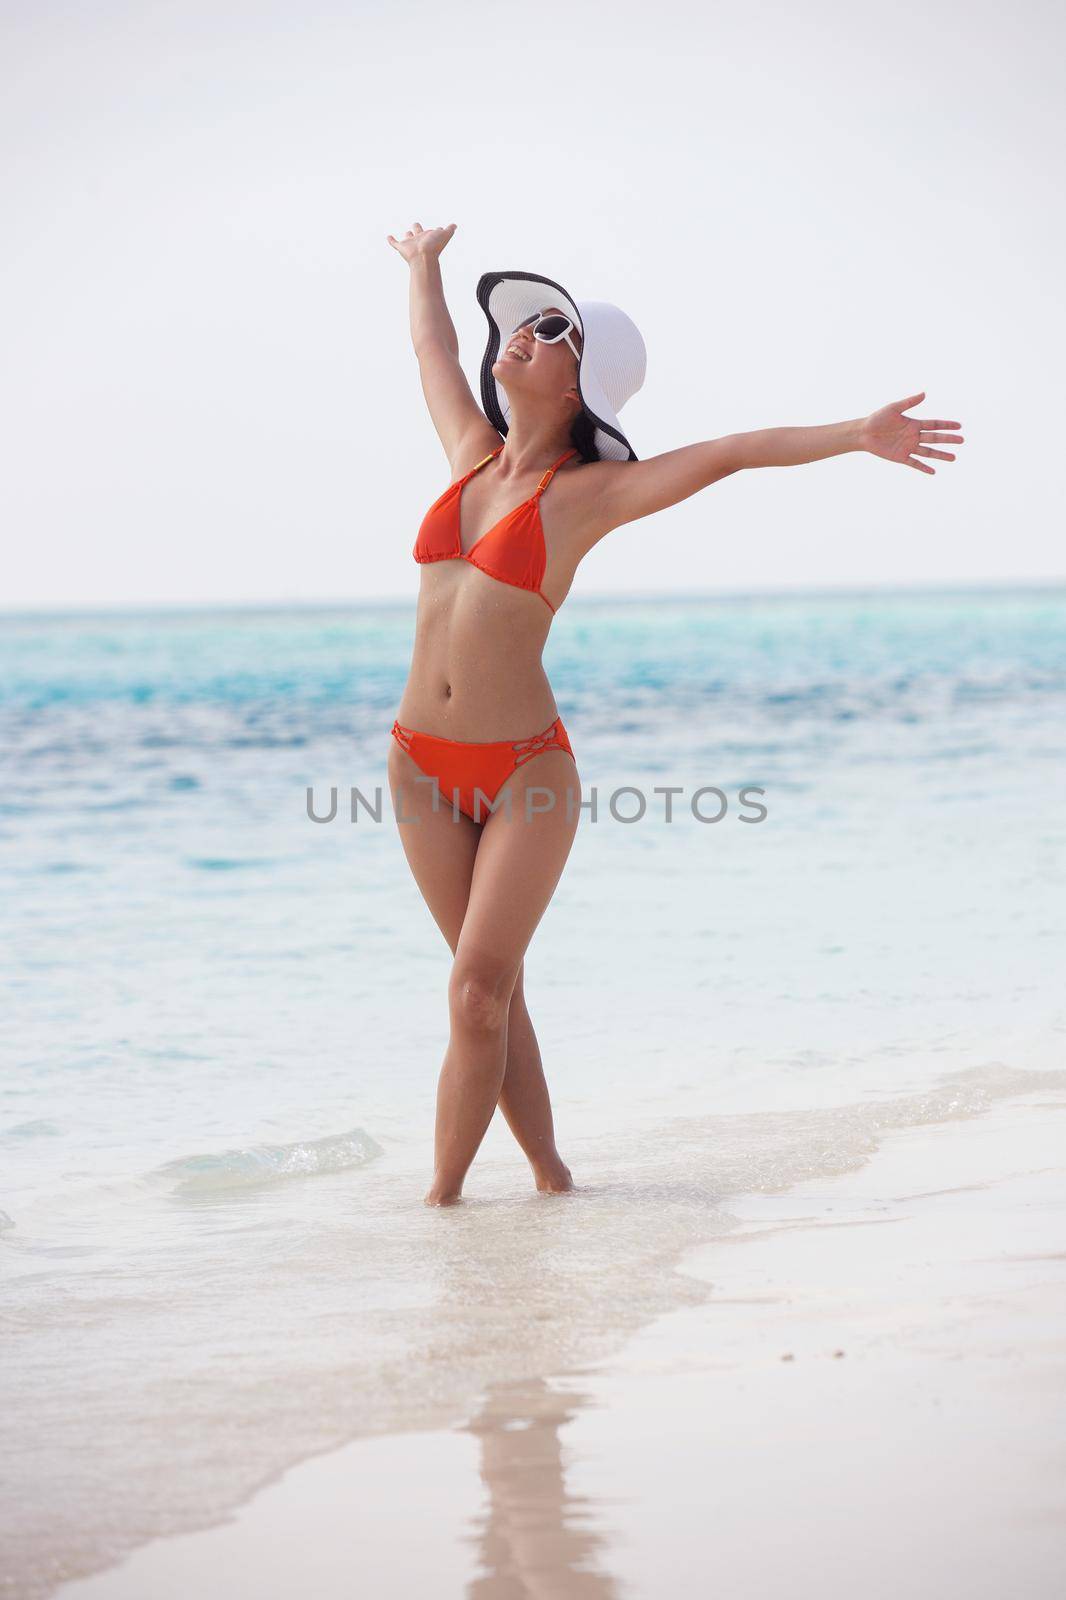 beautifel and happy woman girl on beach have fun and relax on summer vacation  over the sea